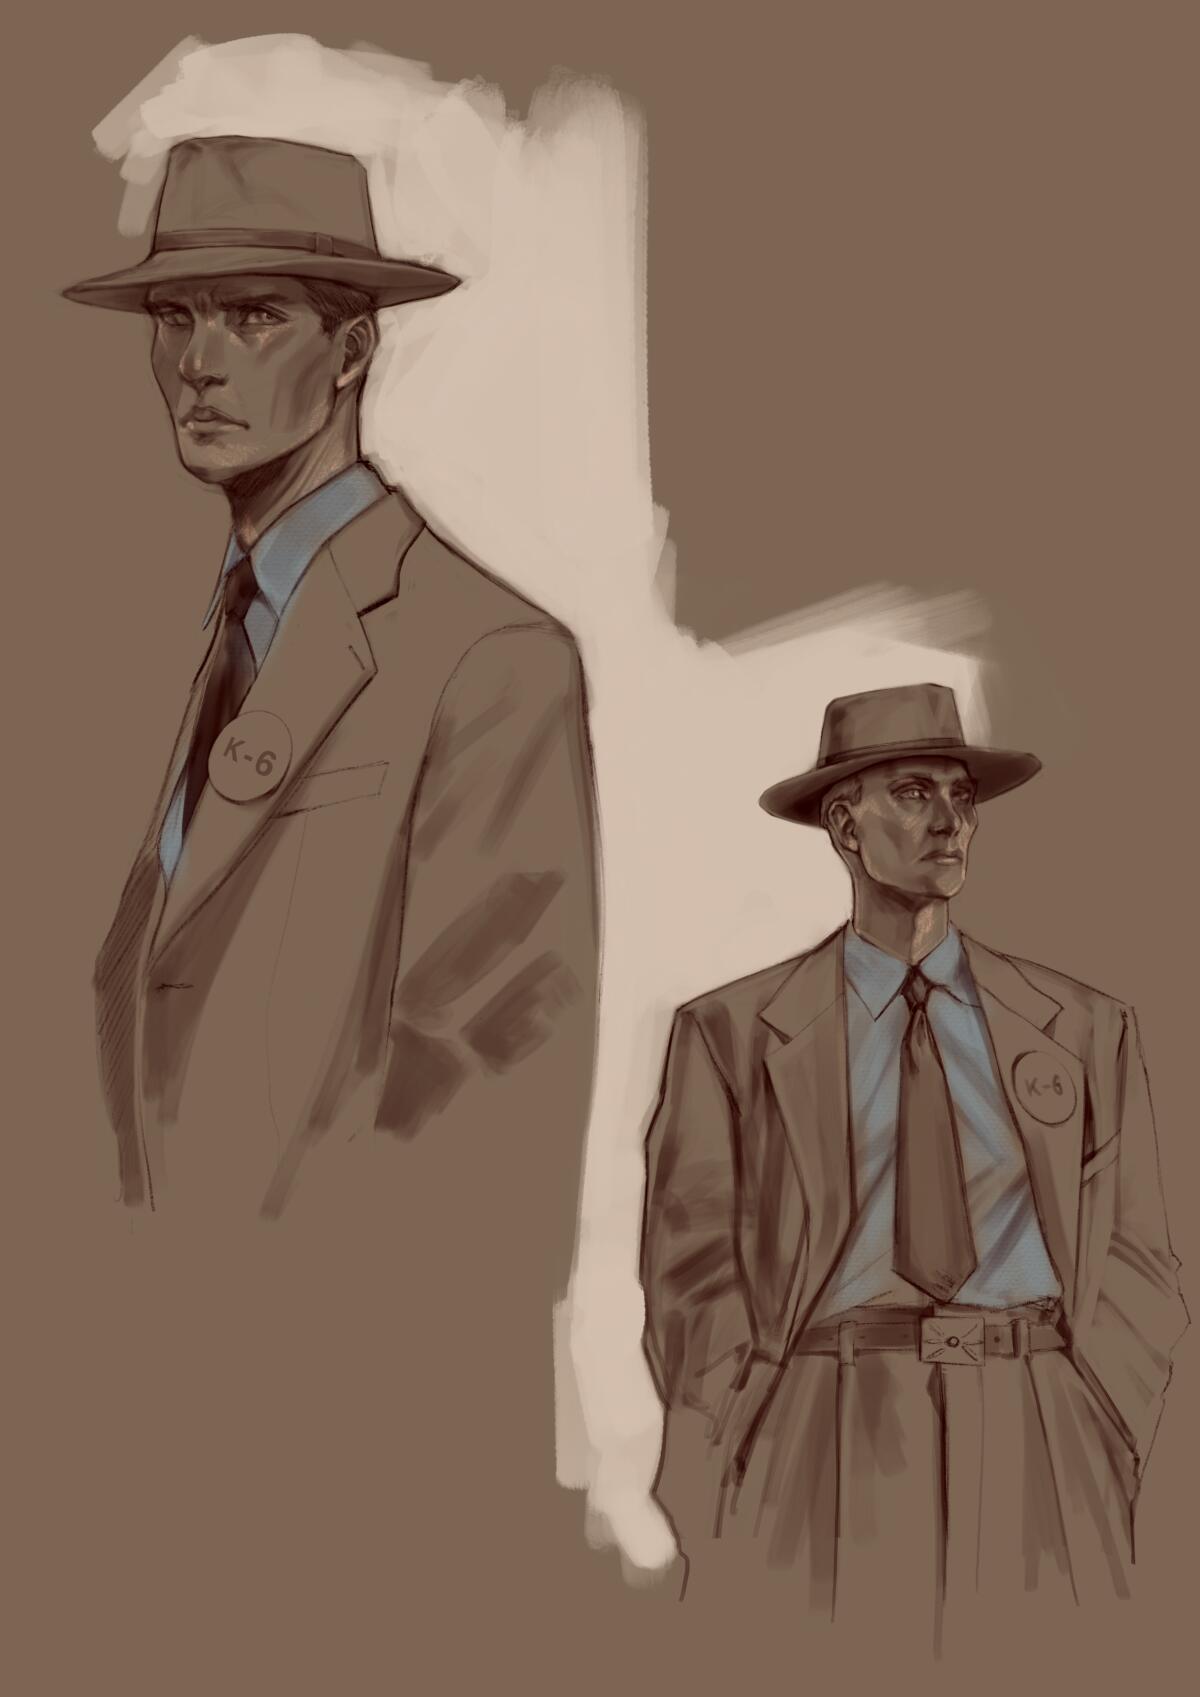 An early sketch of the J. Robert Oppenheimer character's look shows two angles.